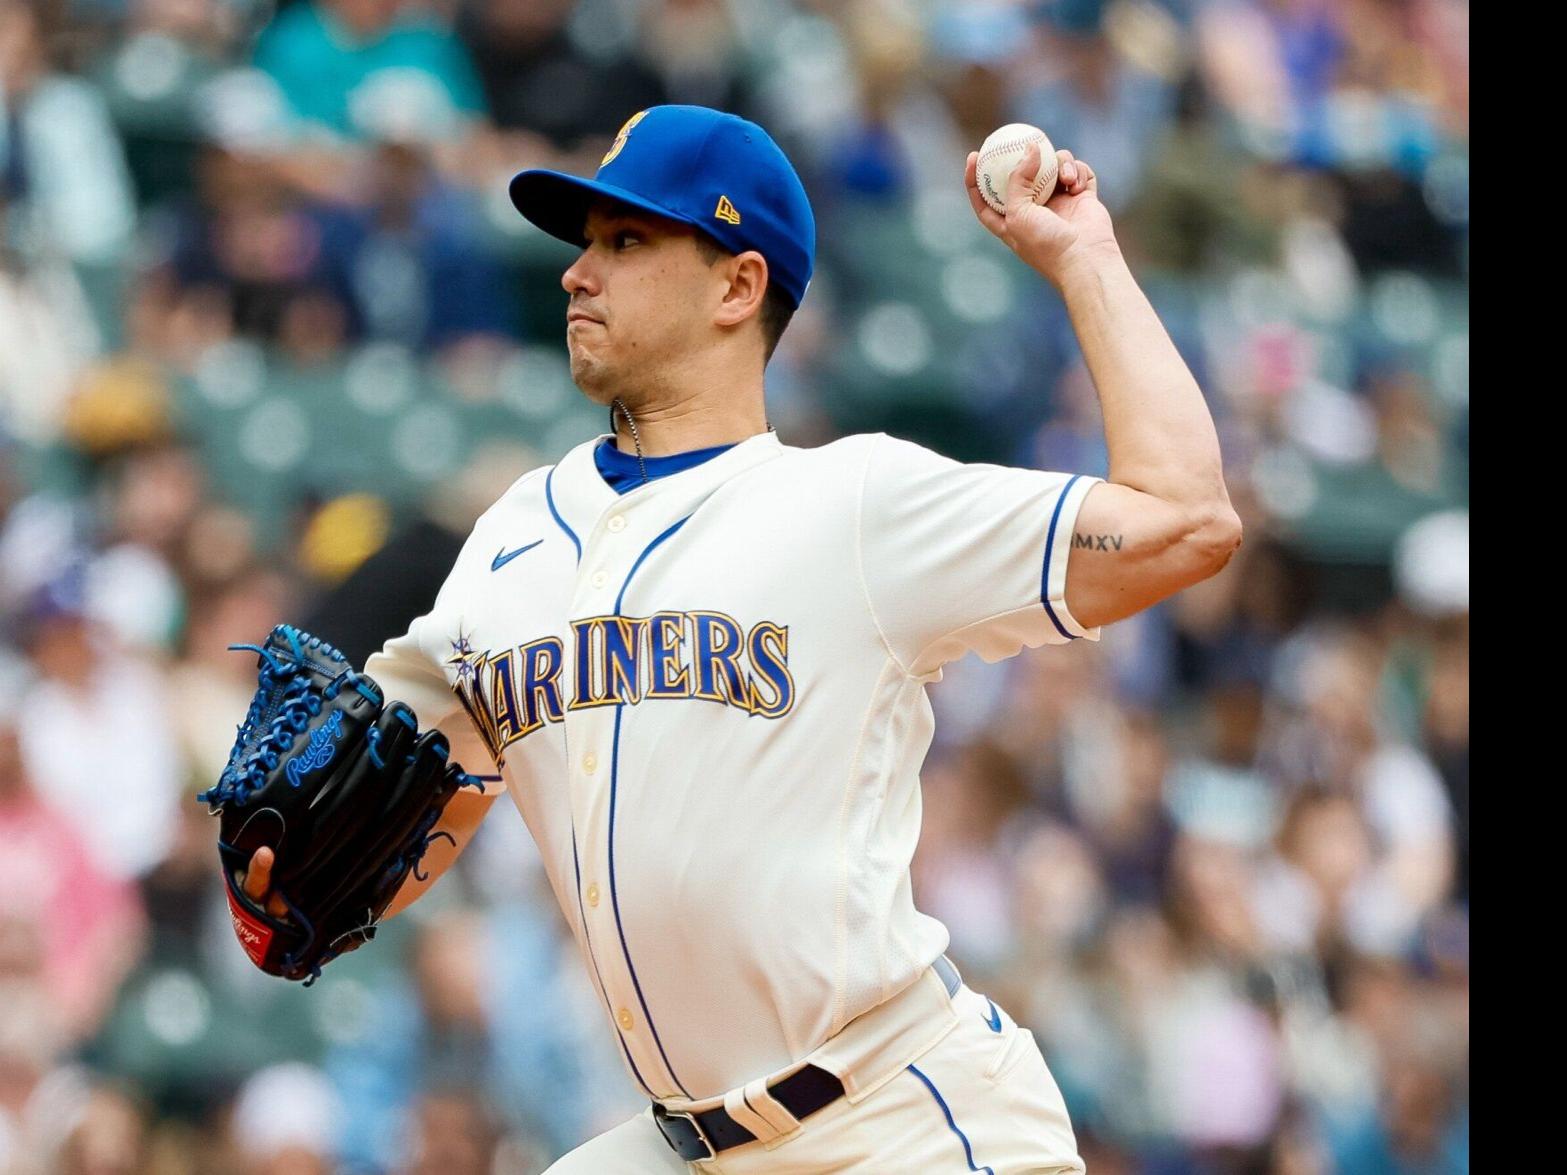 Mariners' Roberto Clemente Award nomination 'huge honor' for Marco Gonzales, Mariners